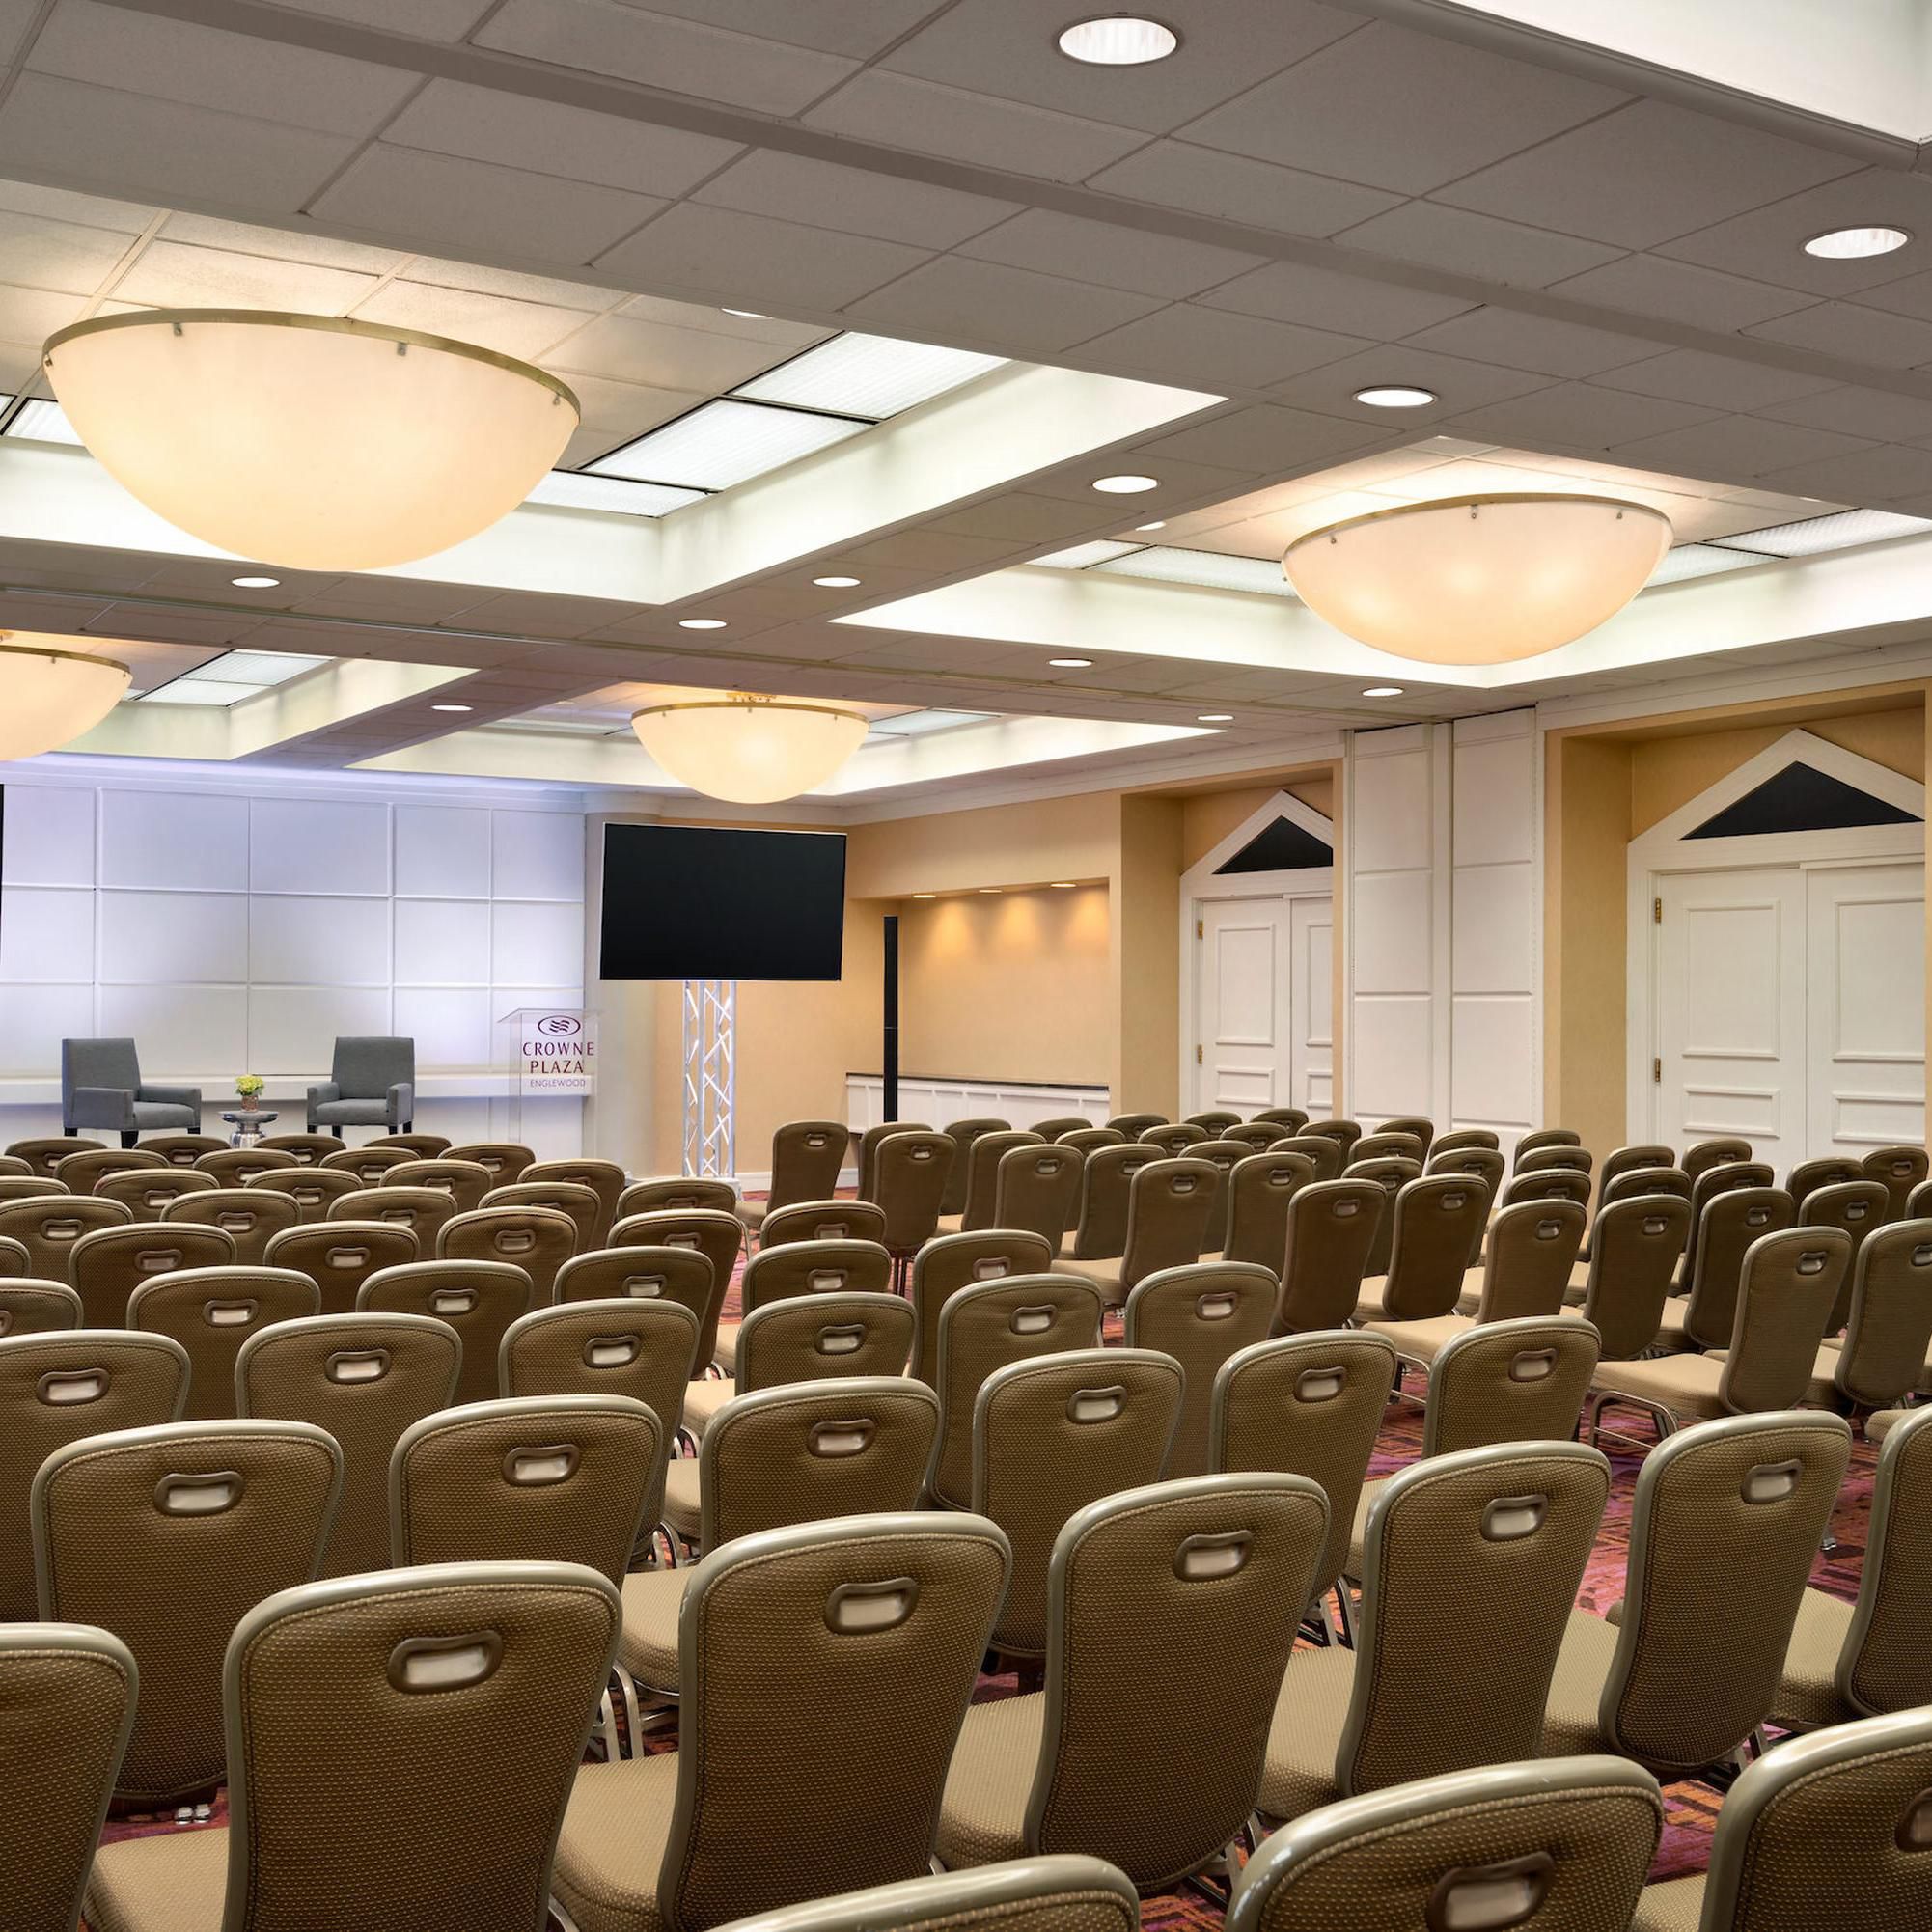 Our Junior Ballroom can host up to 200 attendees.